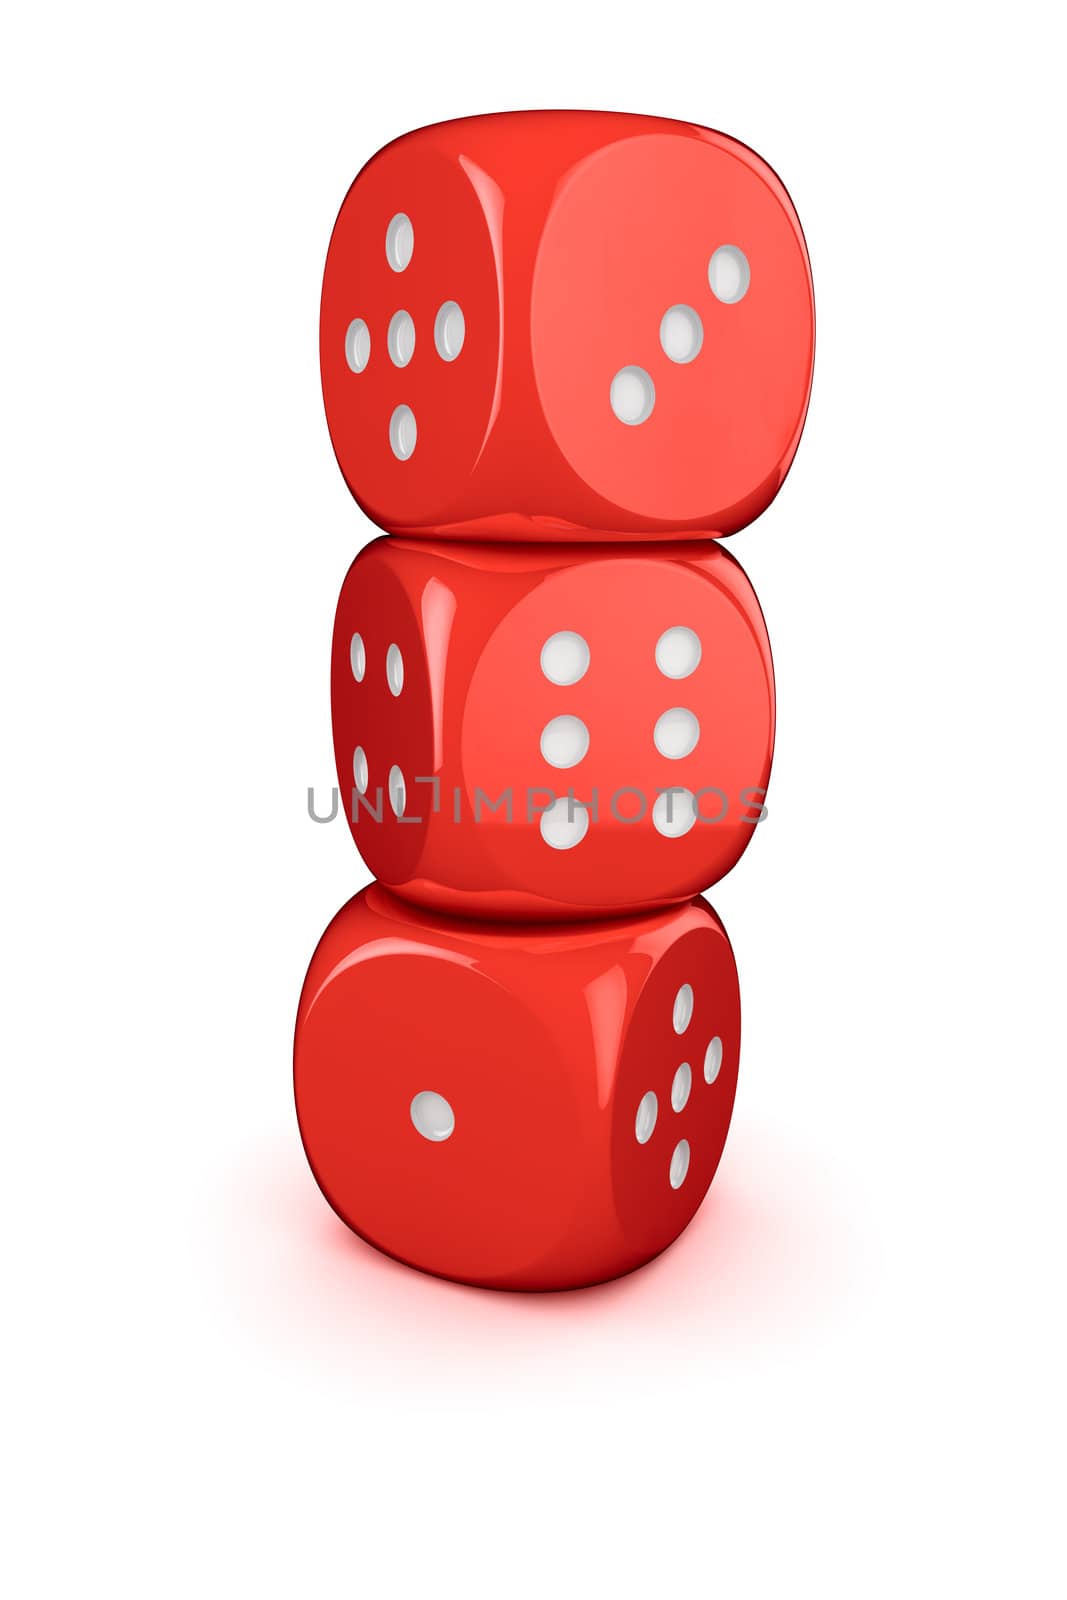 Three red dices in the column